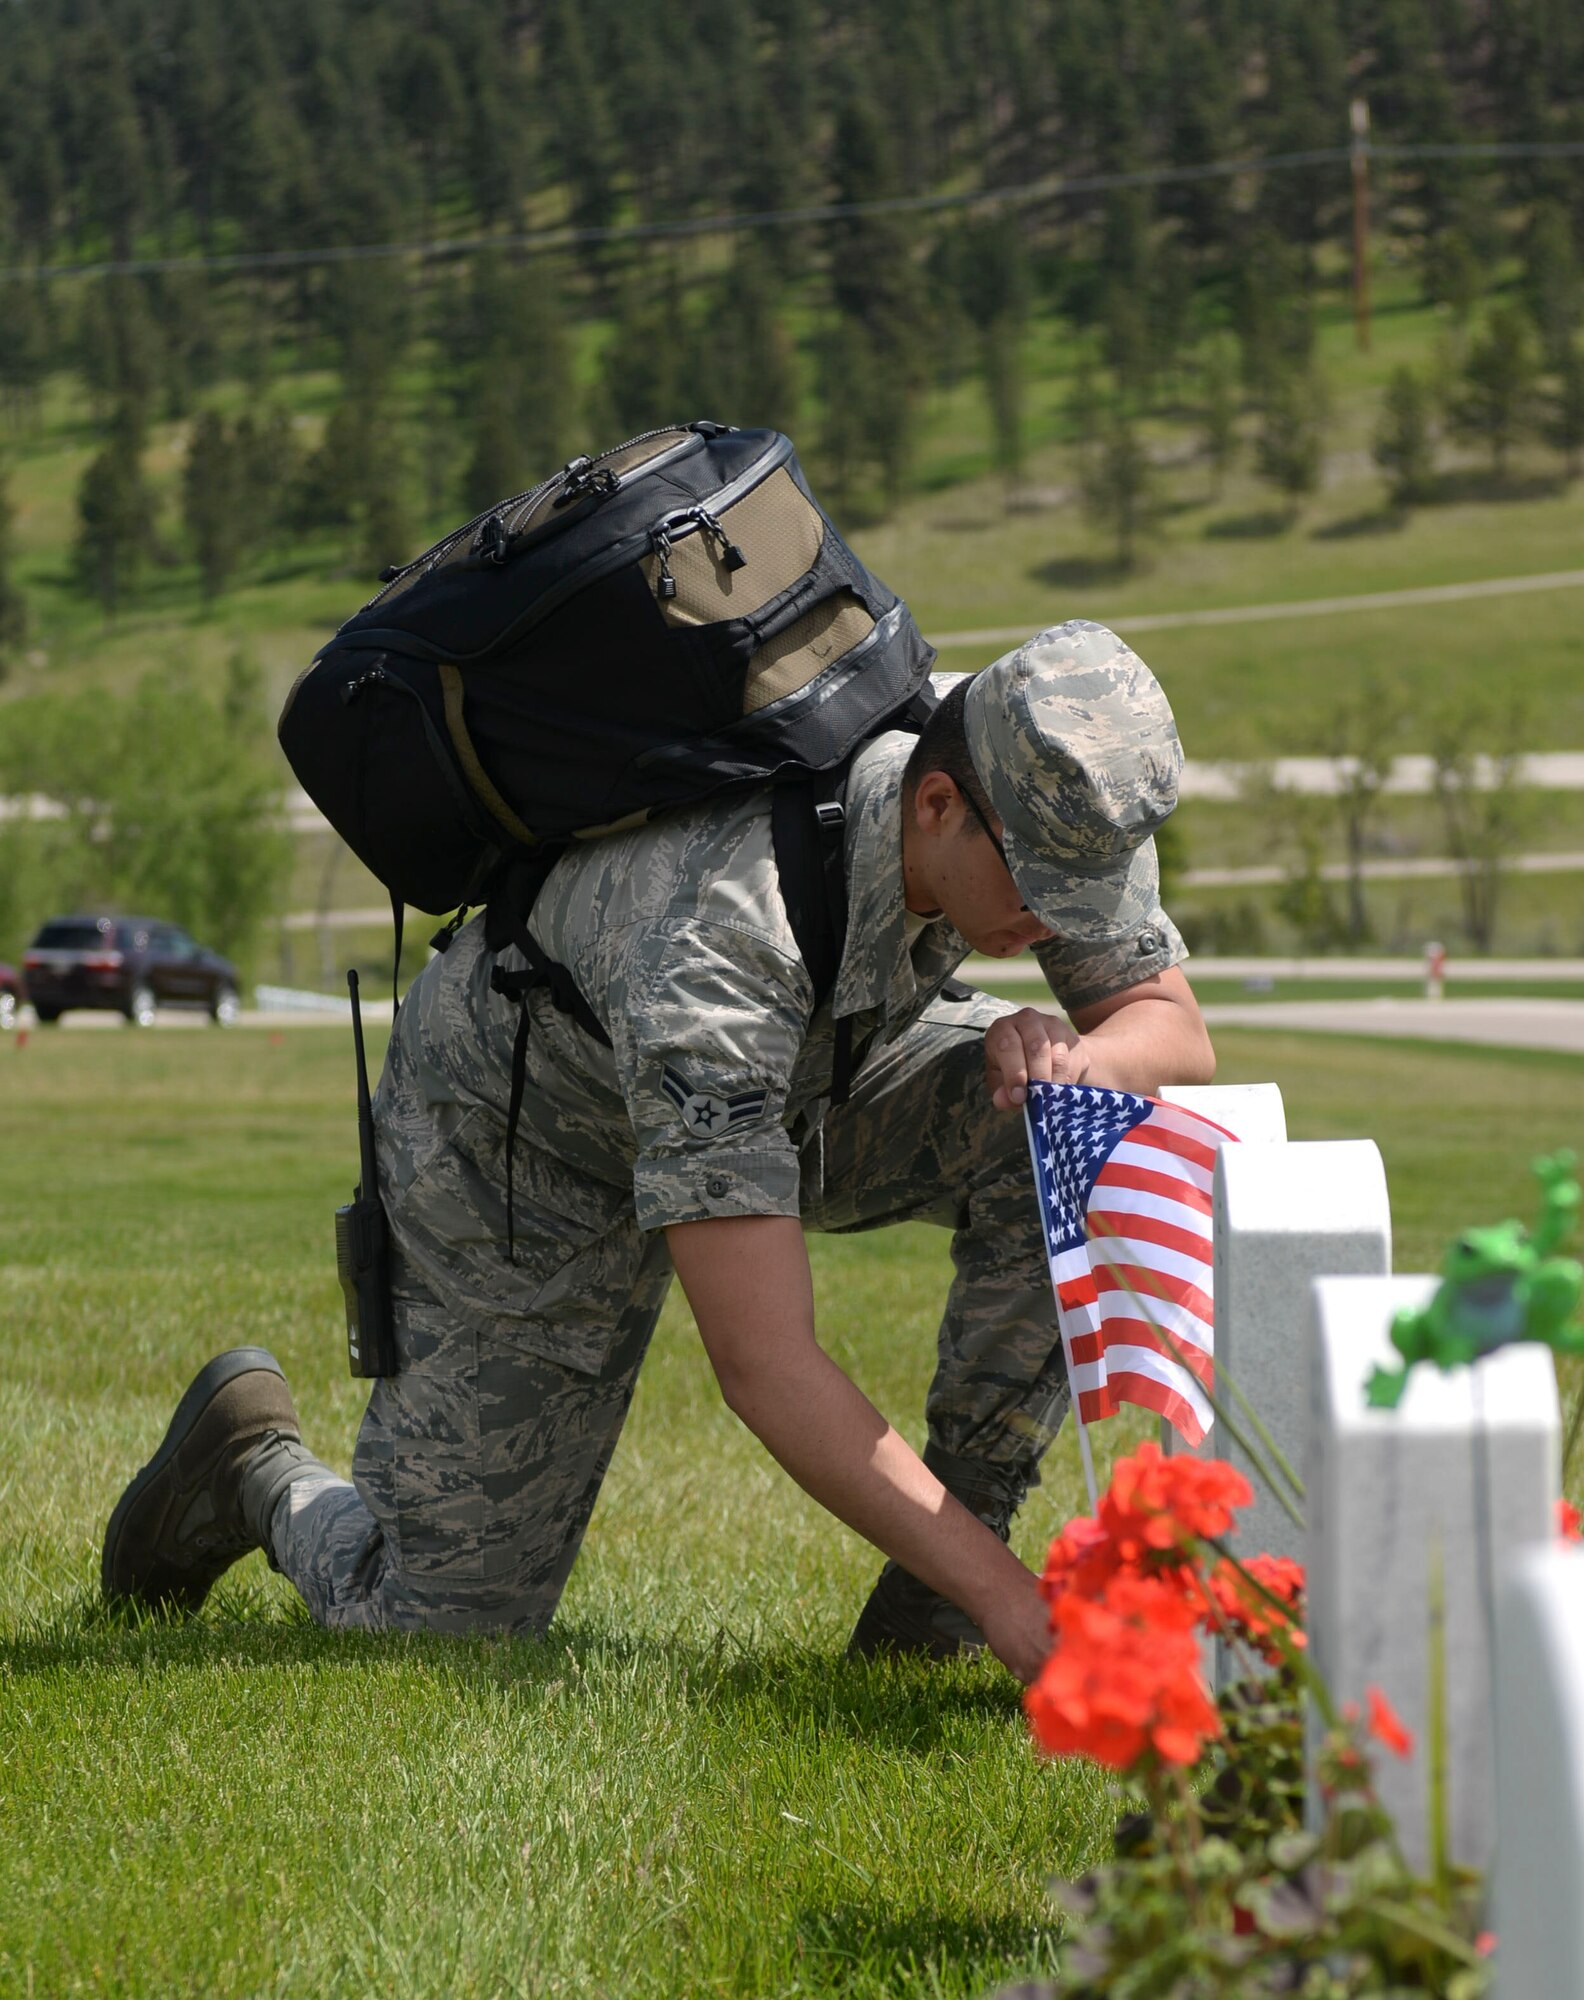 Airman 1st Class Ignacio Luna, 28th Aircraft Maintenance Squadron weapons load crewmember, places a flag in front of a tombstone for a deceased military member at the Black Hills National Cemetery in Sturgis, S.D., May 28, 2016. Approximately 608 burials are conducted each year in the cemetery. (U.S. Air Force photo by Airman 1st Class Sadie Colbert/Released)